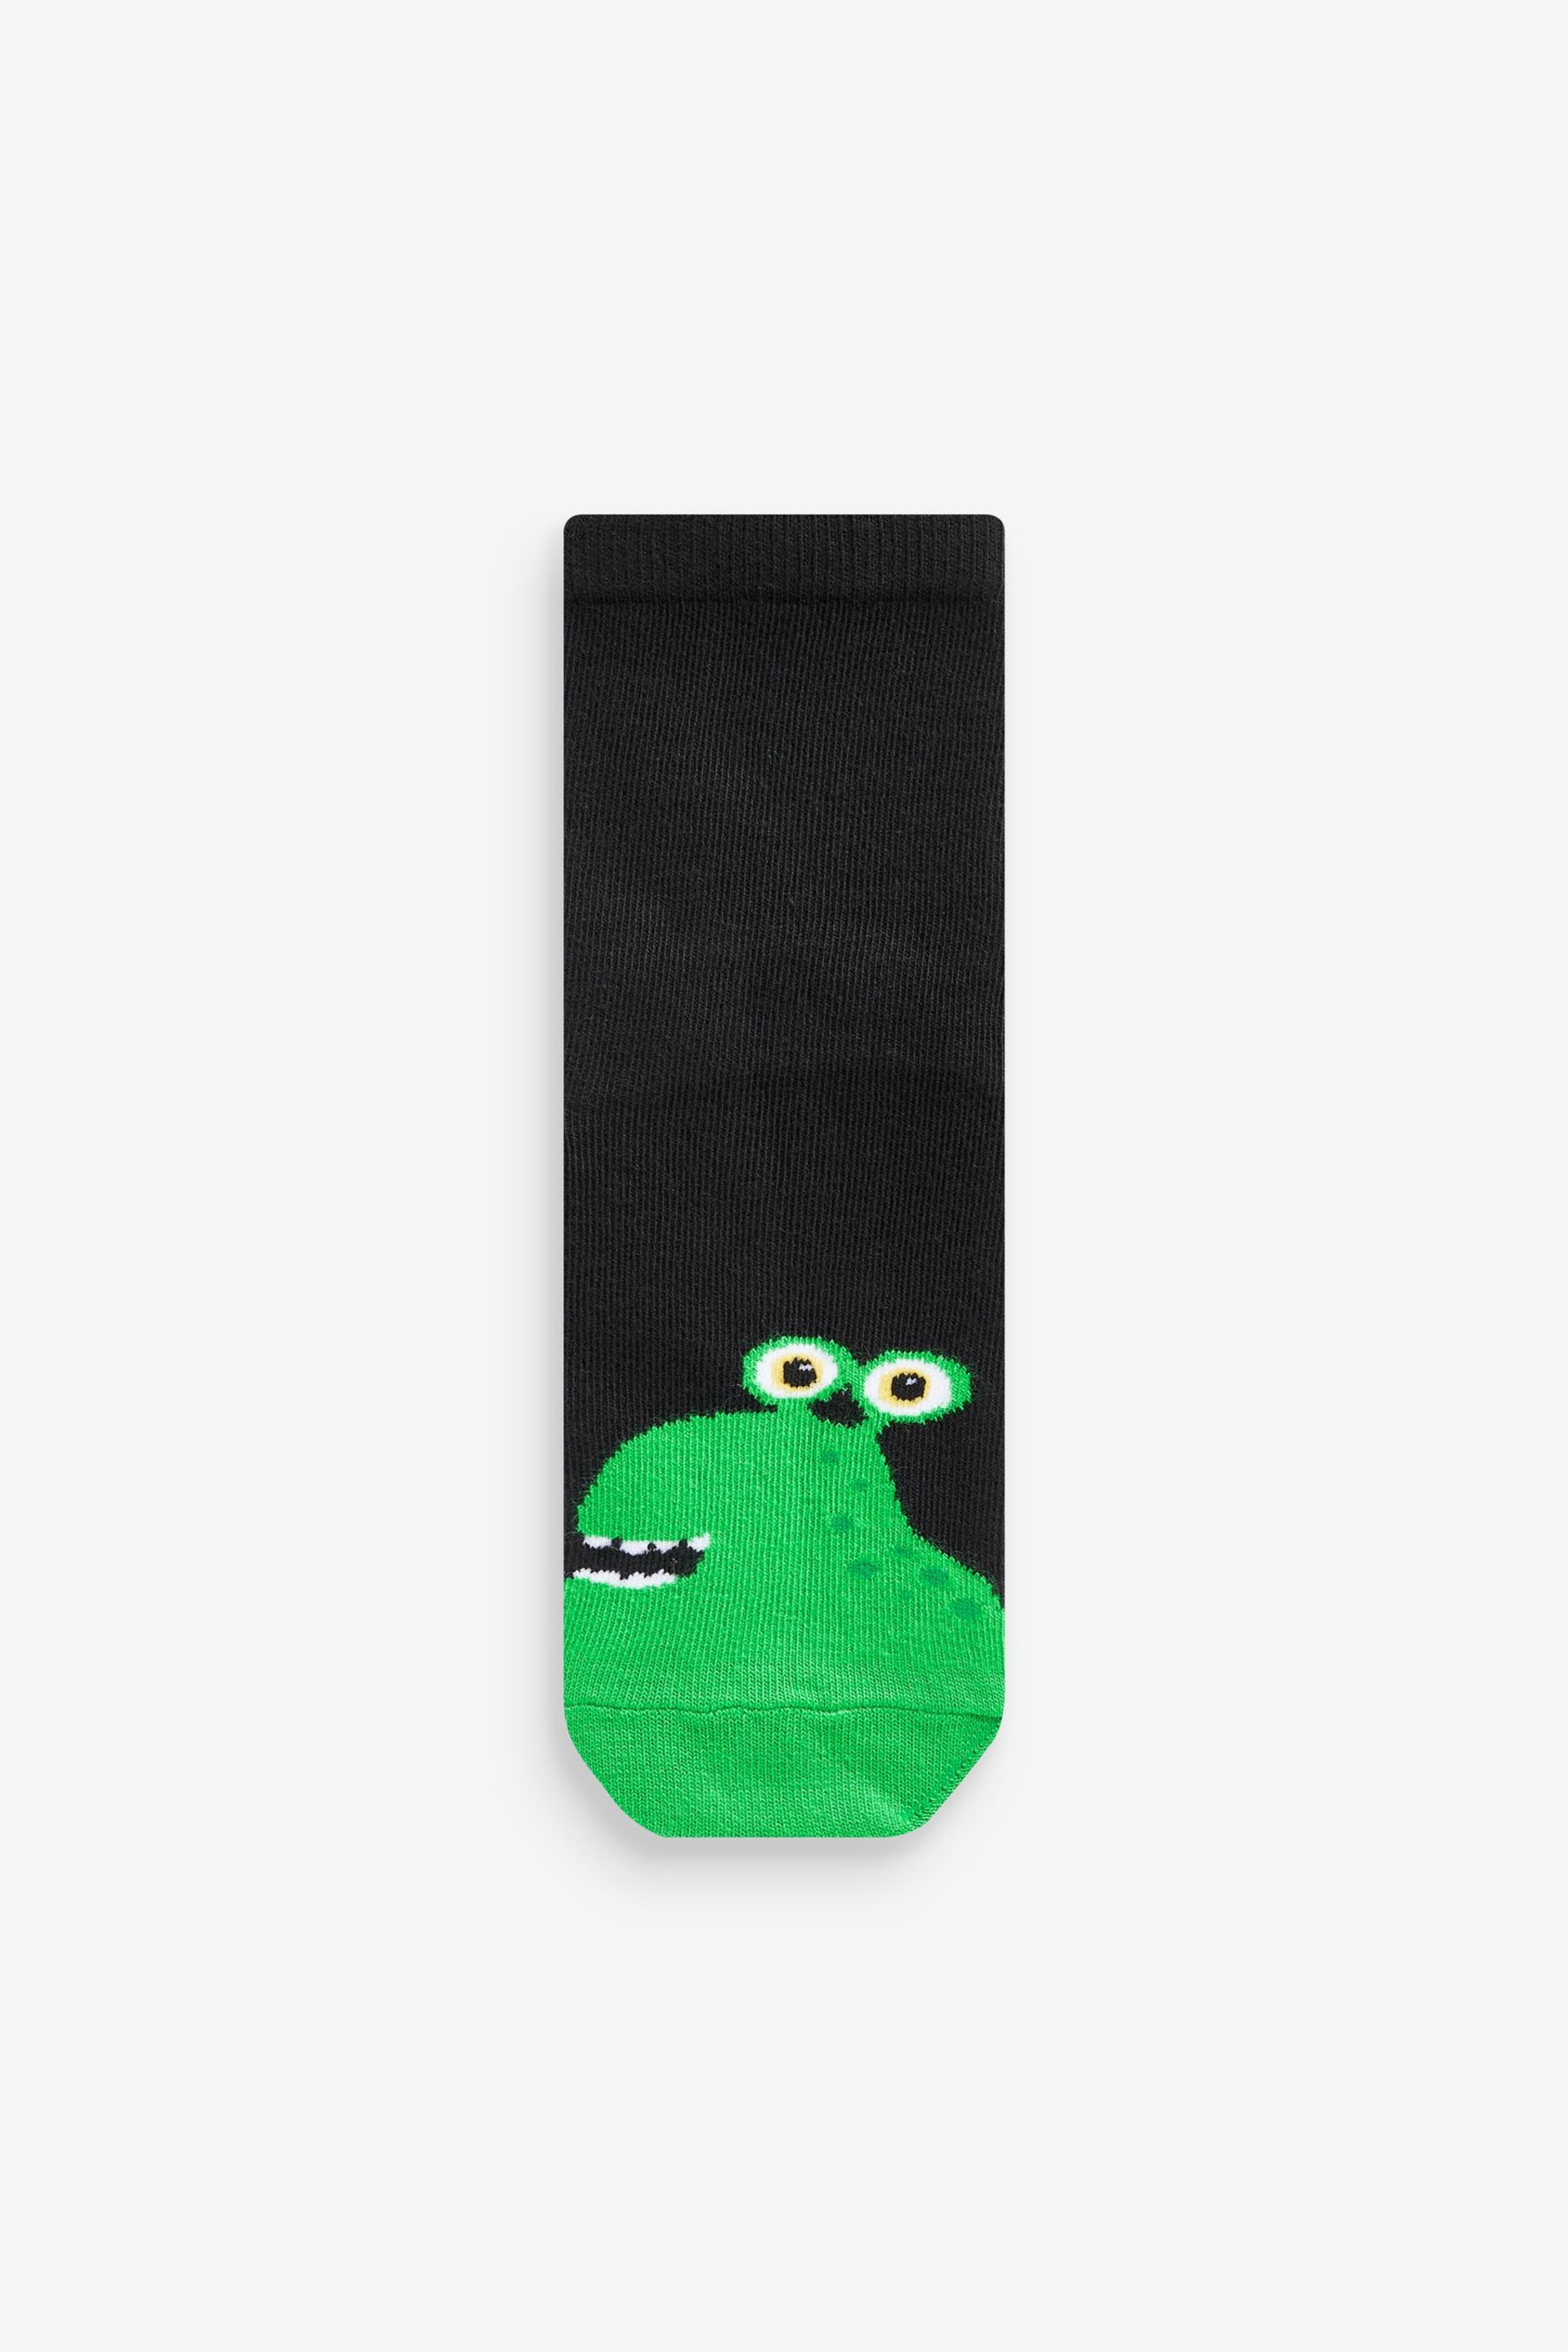 Black/Bright Monsters Cotton Rich Socks 10 Pack - Image 6 of 11